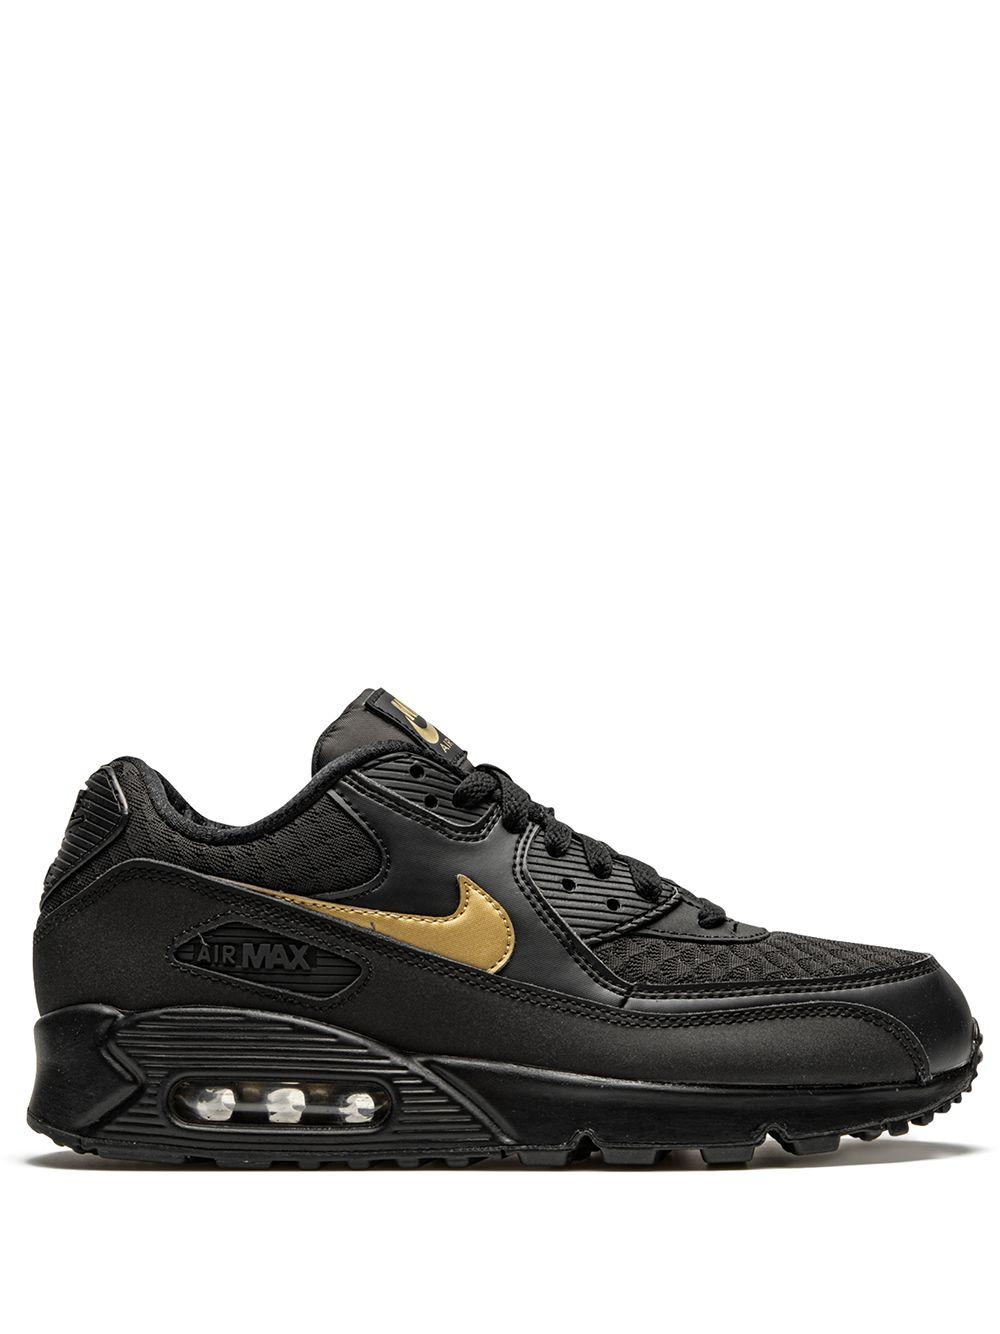 oplichterij Overtreding vers Nike Air Max 90 Essential 'black/gold' Shoes for Men | Lyst